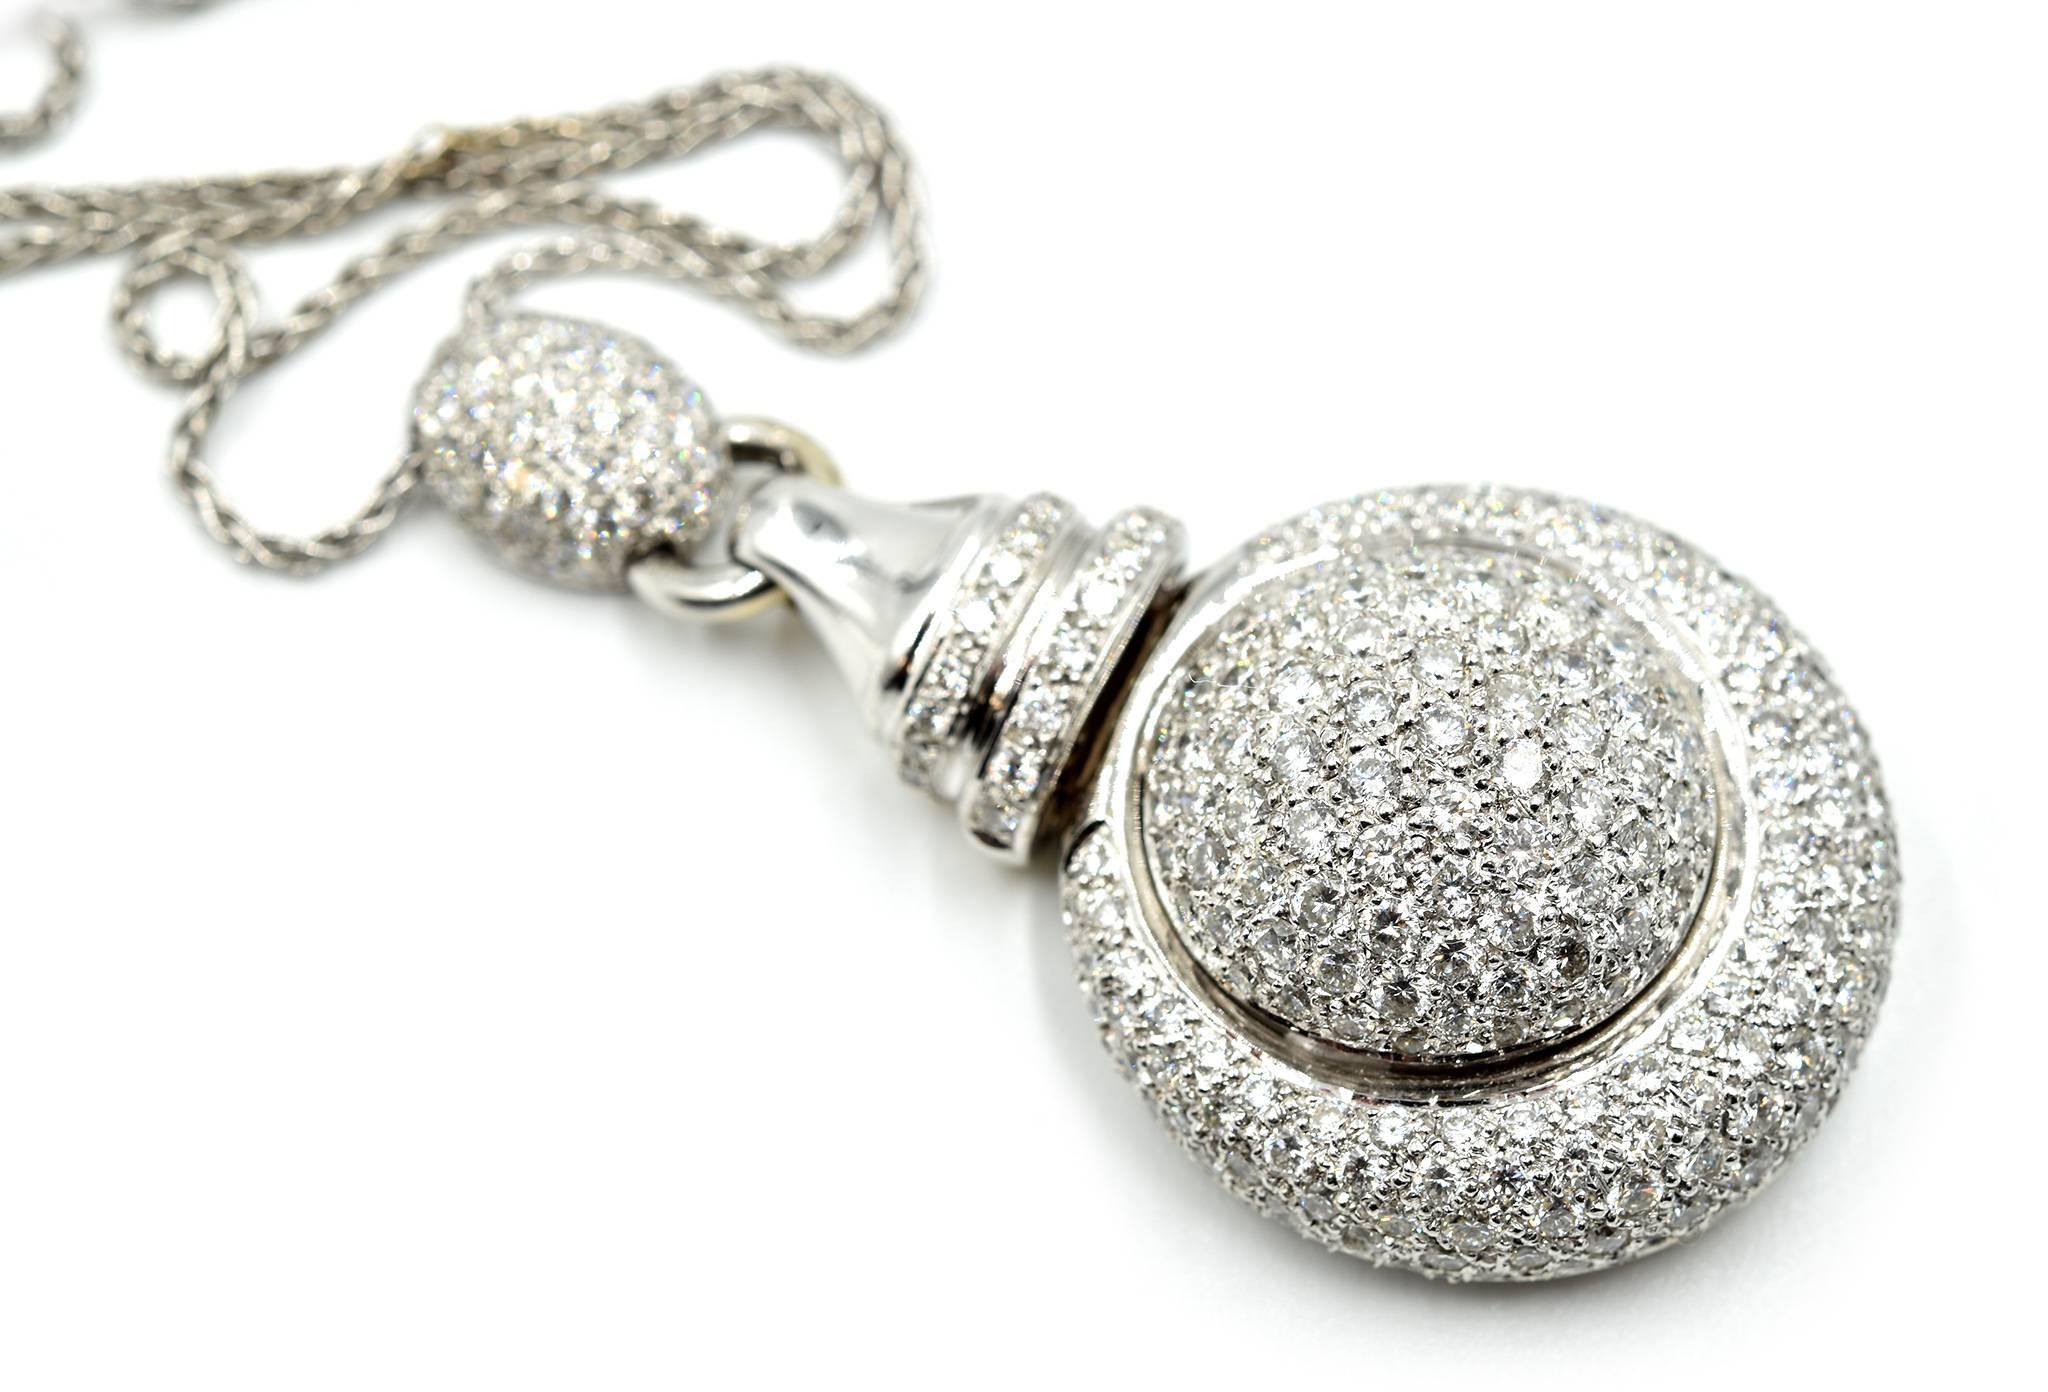 Designer: custom design
Material: 18k white gold
Diamonds: 6.48 total carat weight
Color: G
Clarity: VS
Dimensions of Pendant: 1 ¼ inches long x 1 ¾ inches in height 
Necklace: 16 inches long
Weight: 29.7 grams


